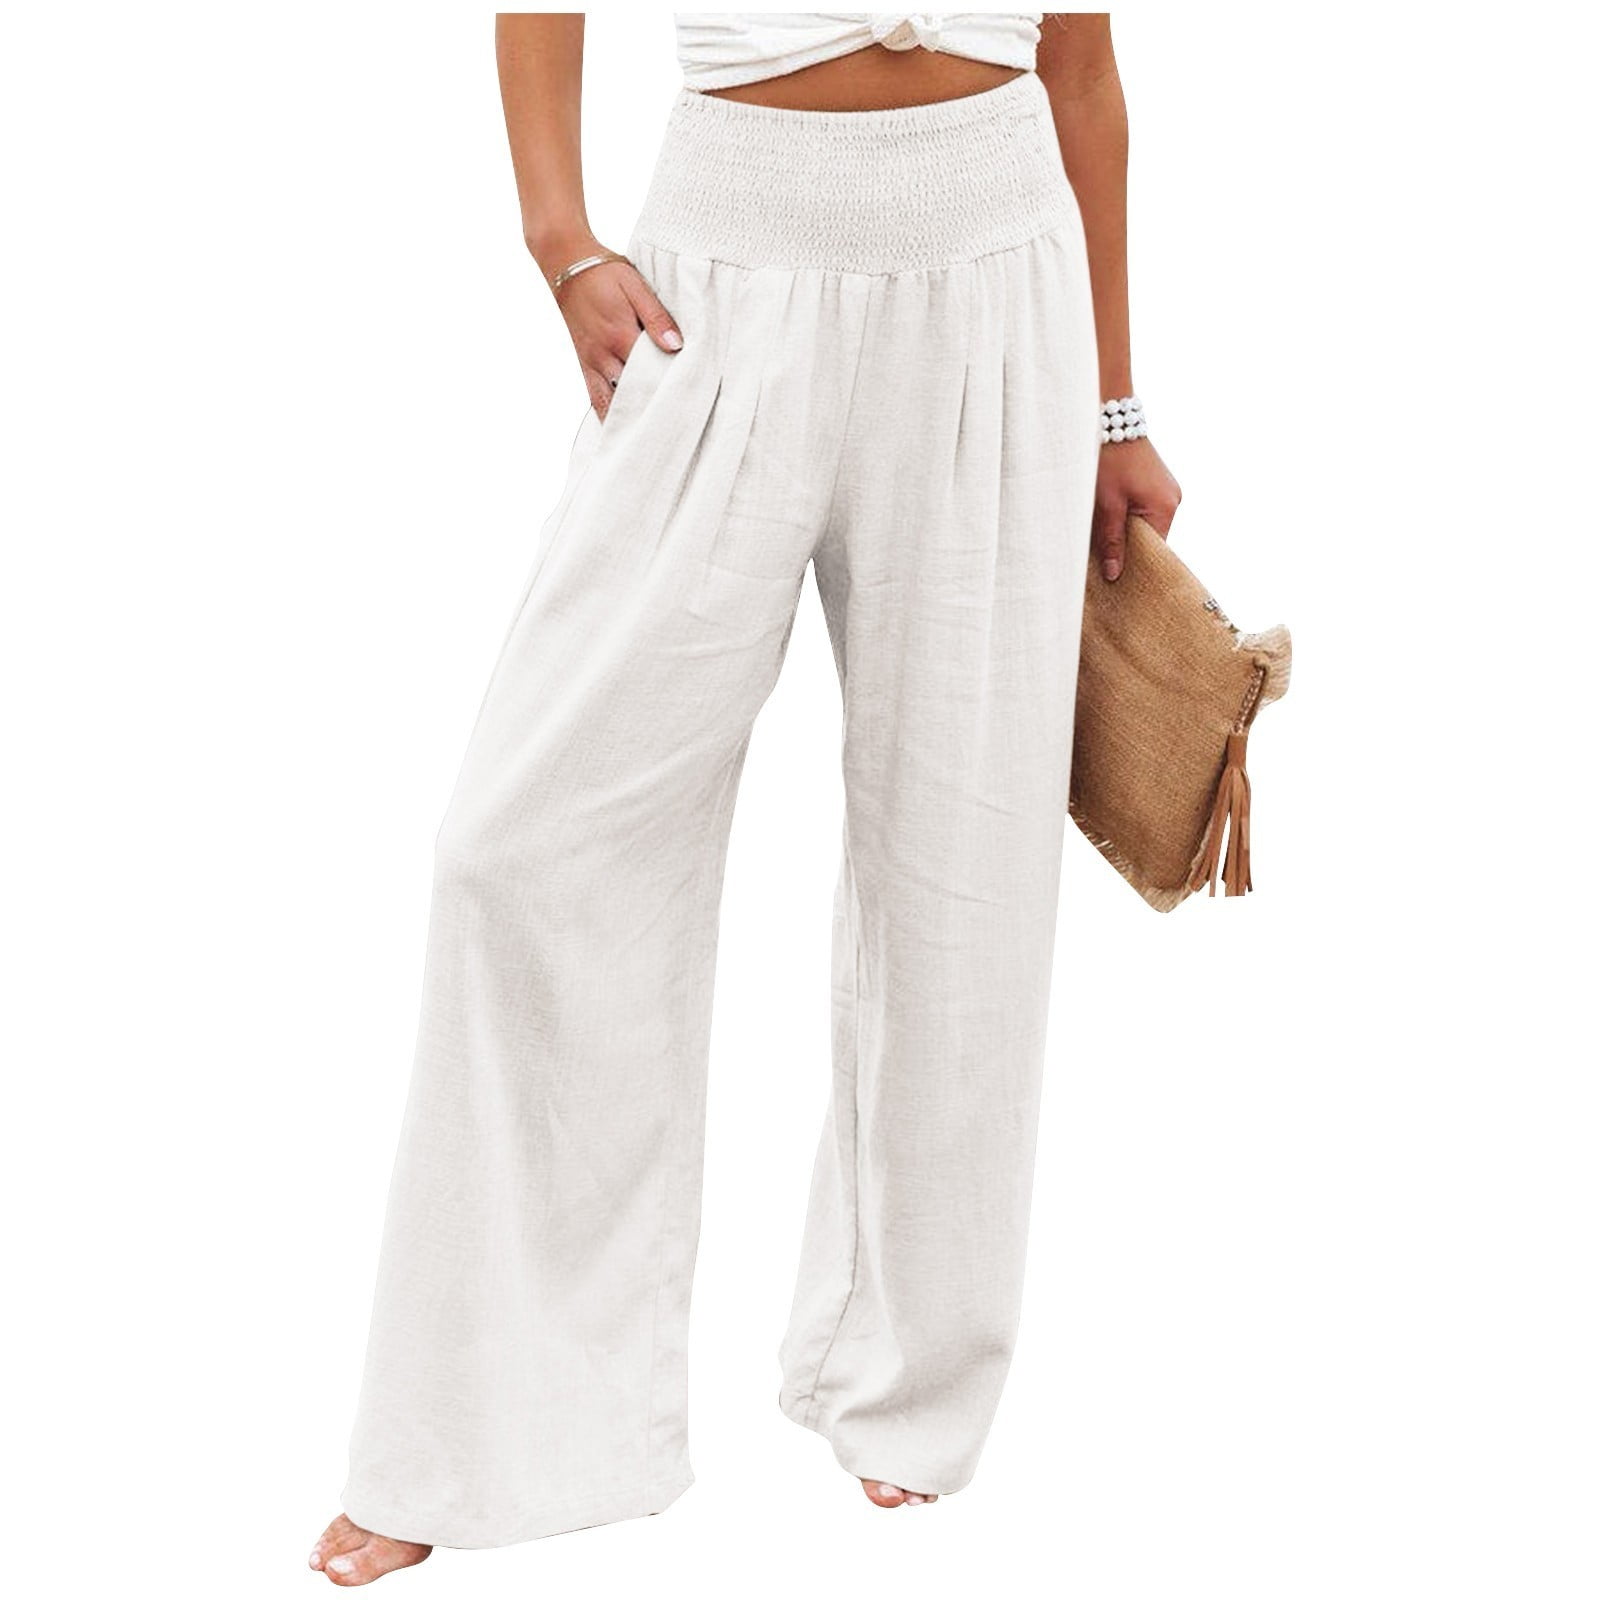 How to Style White Palazzo Pants: 15 Breezy Outfit Ideas for Ladies -  FMag.com